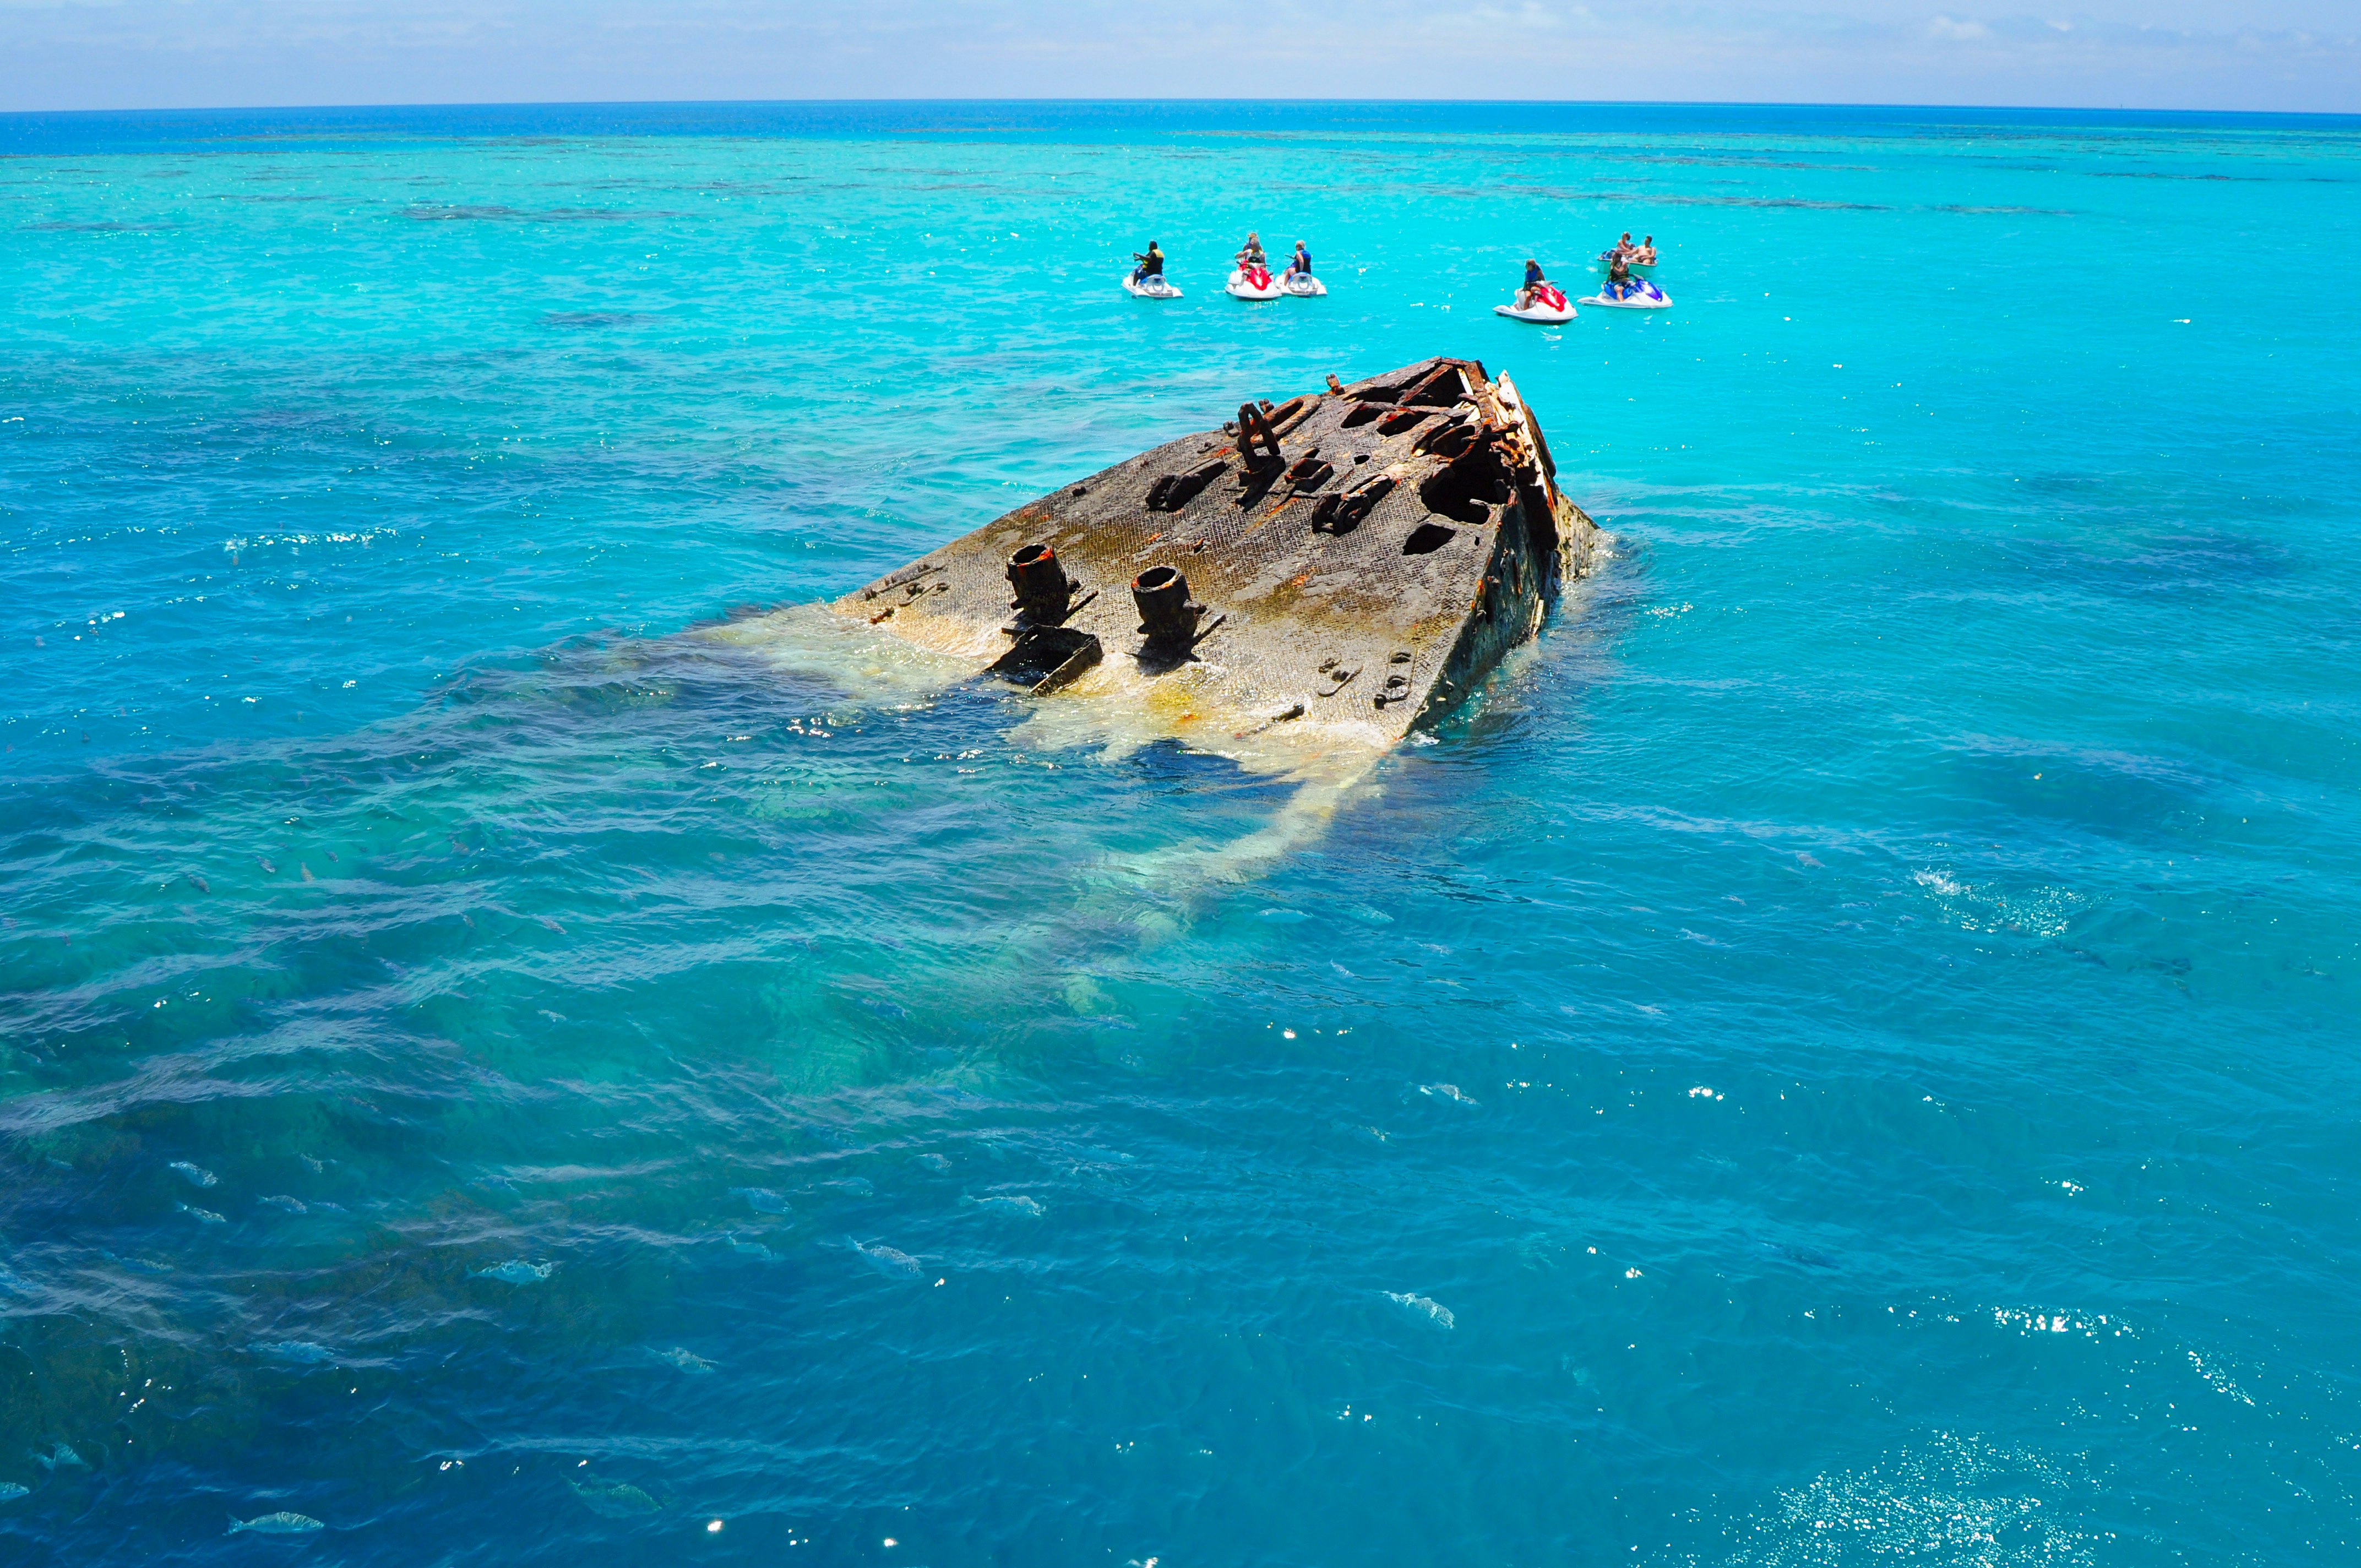 A group of people in jet skis stop next to a semi-submerged shipwreck in ocean near the Bermuda island. 